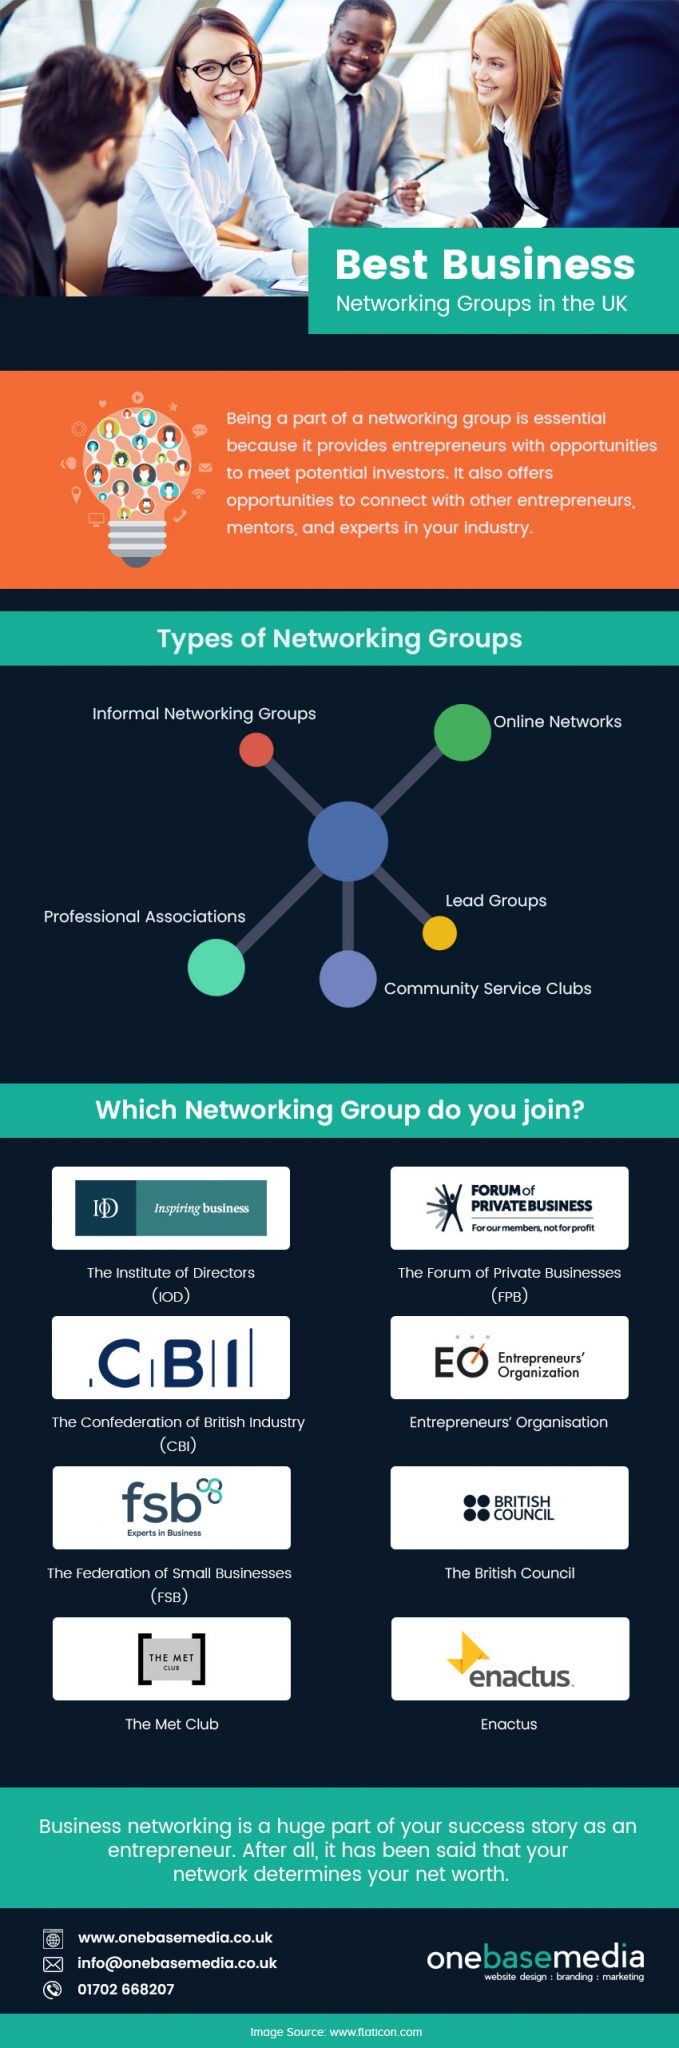 11 best business networking groups for new businesses